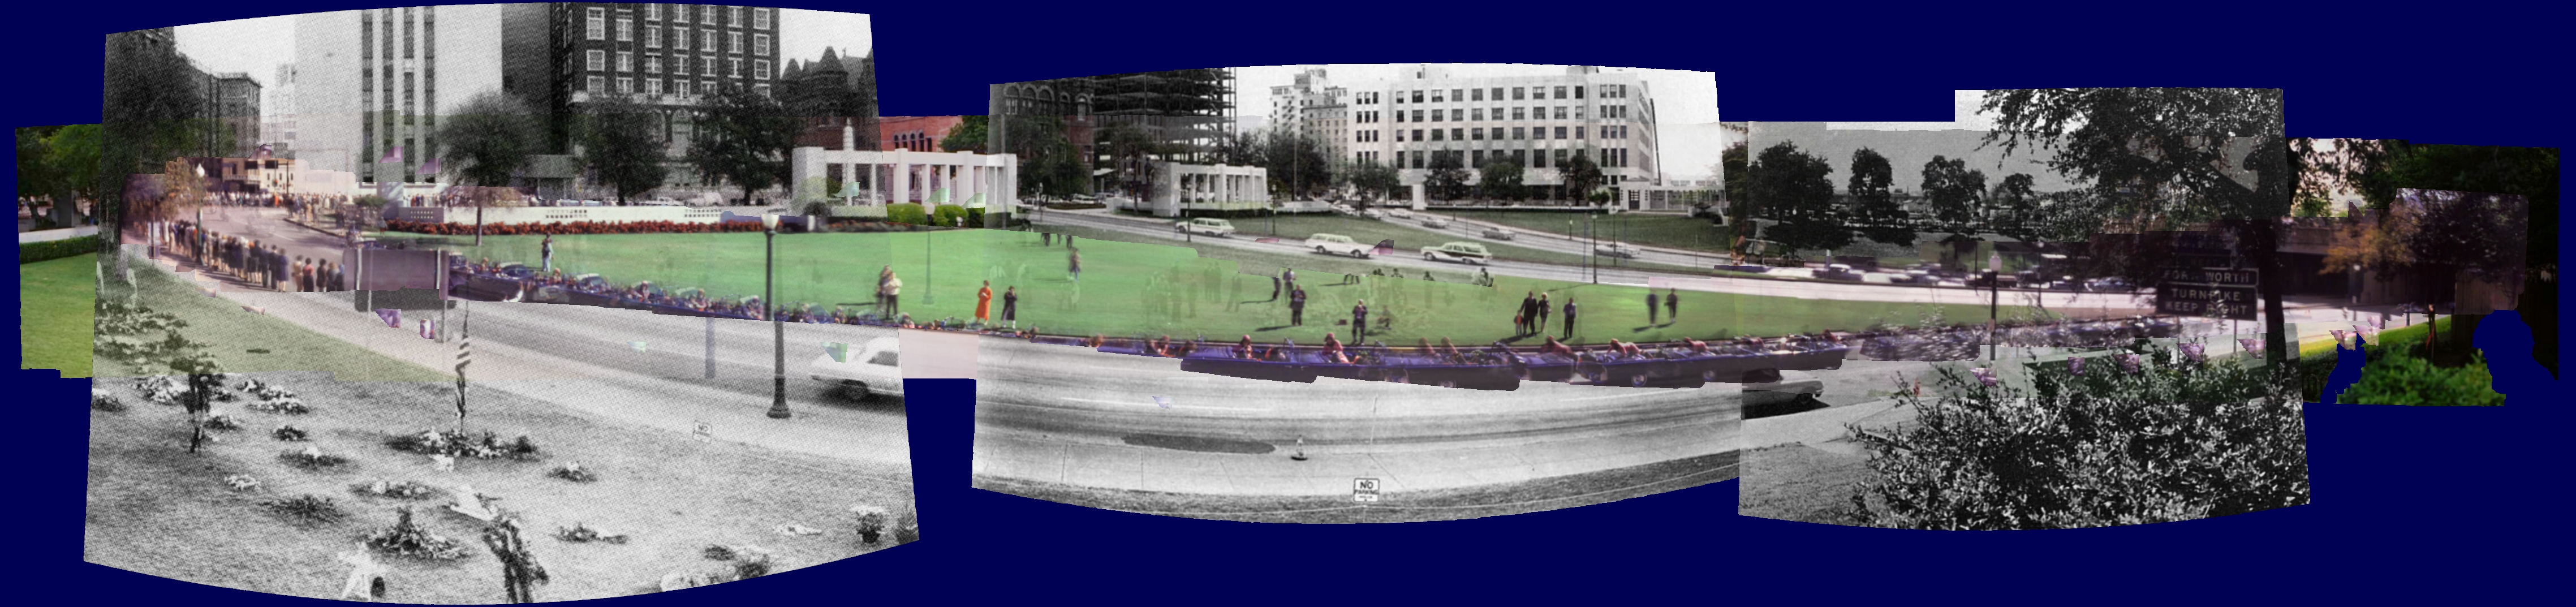 Panorama of Dealey Plaza